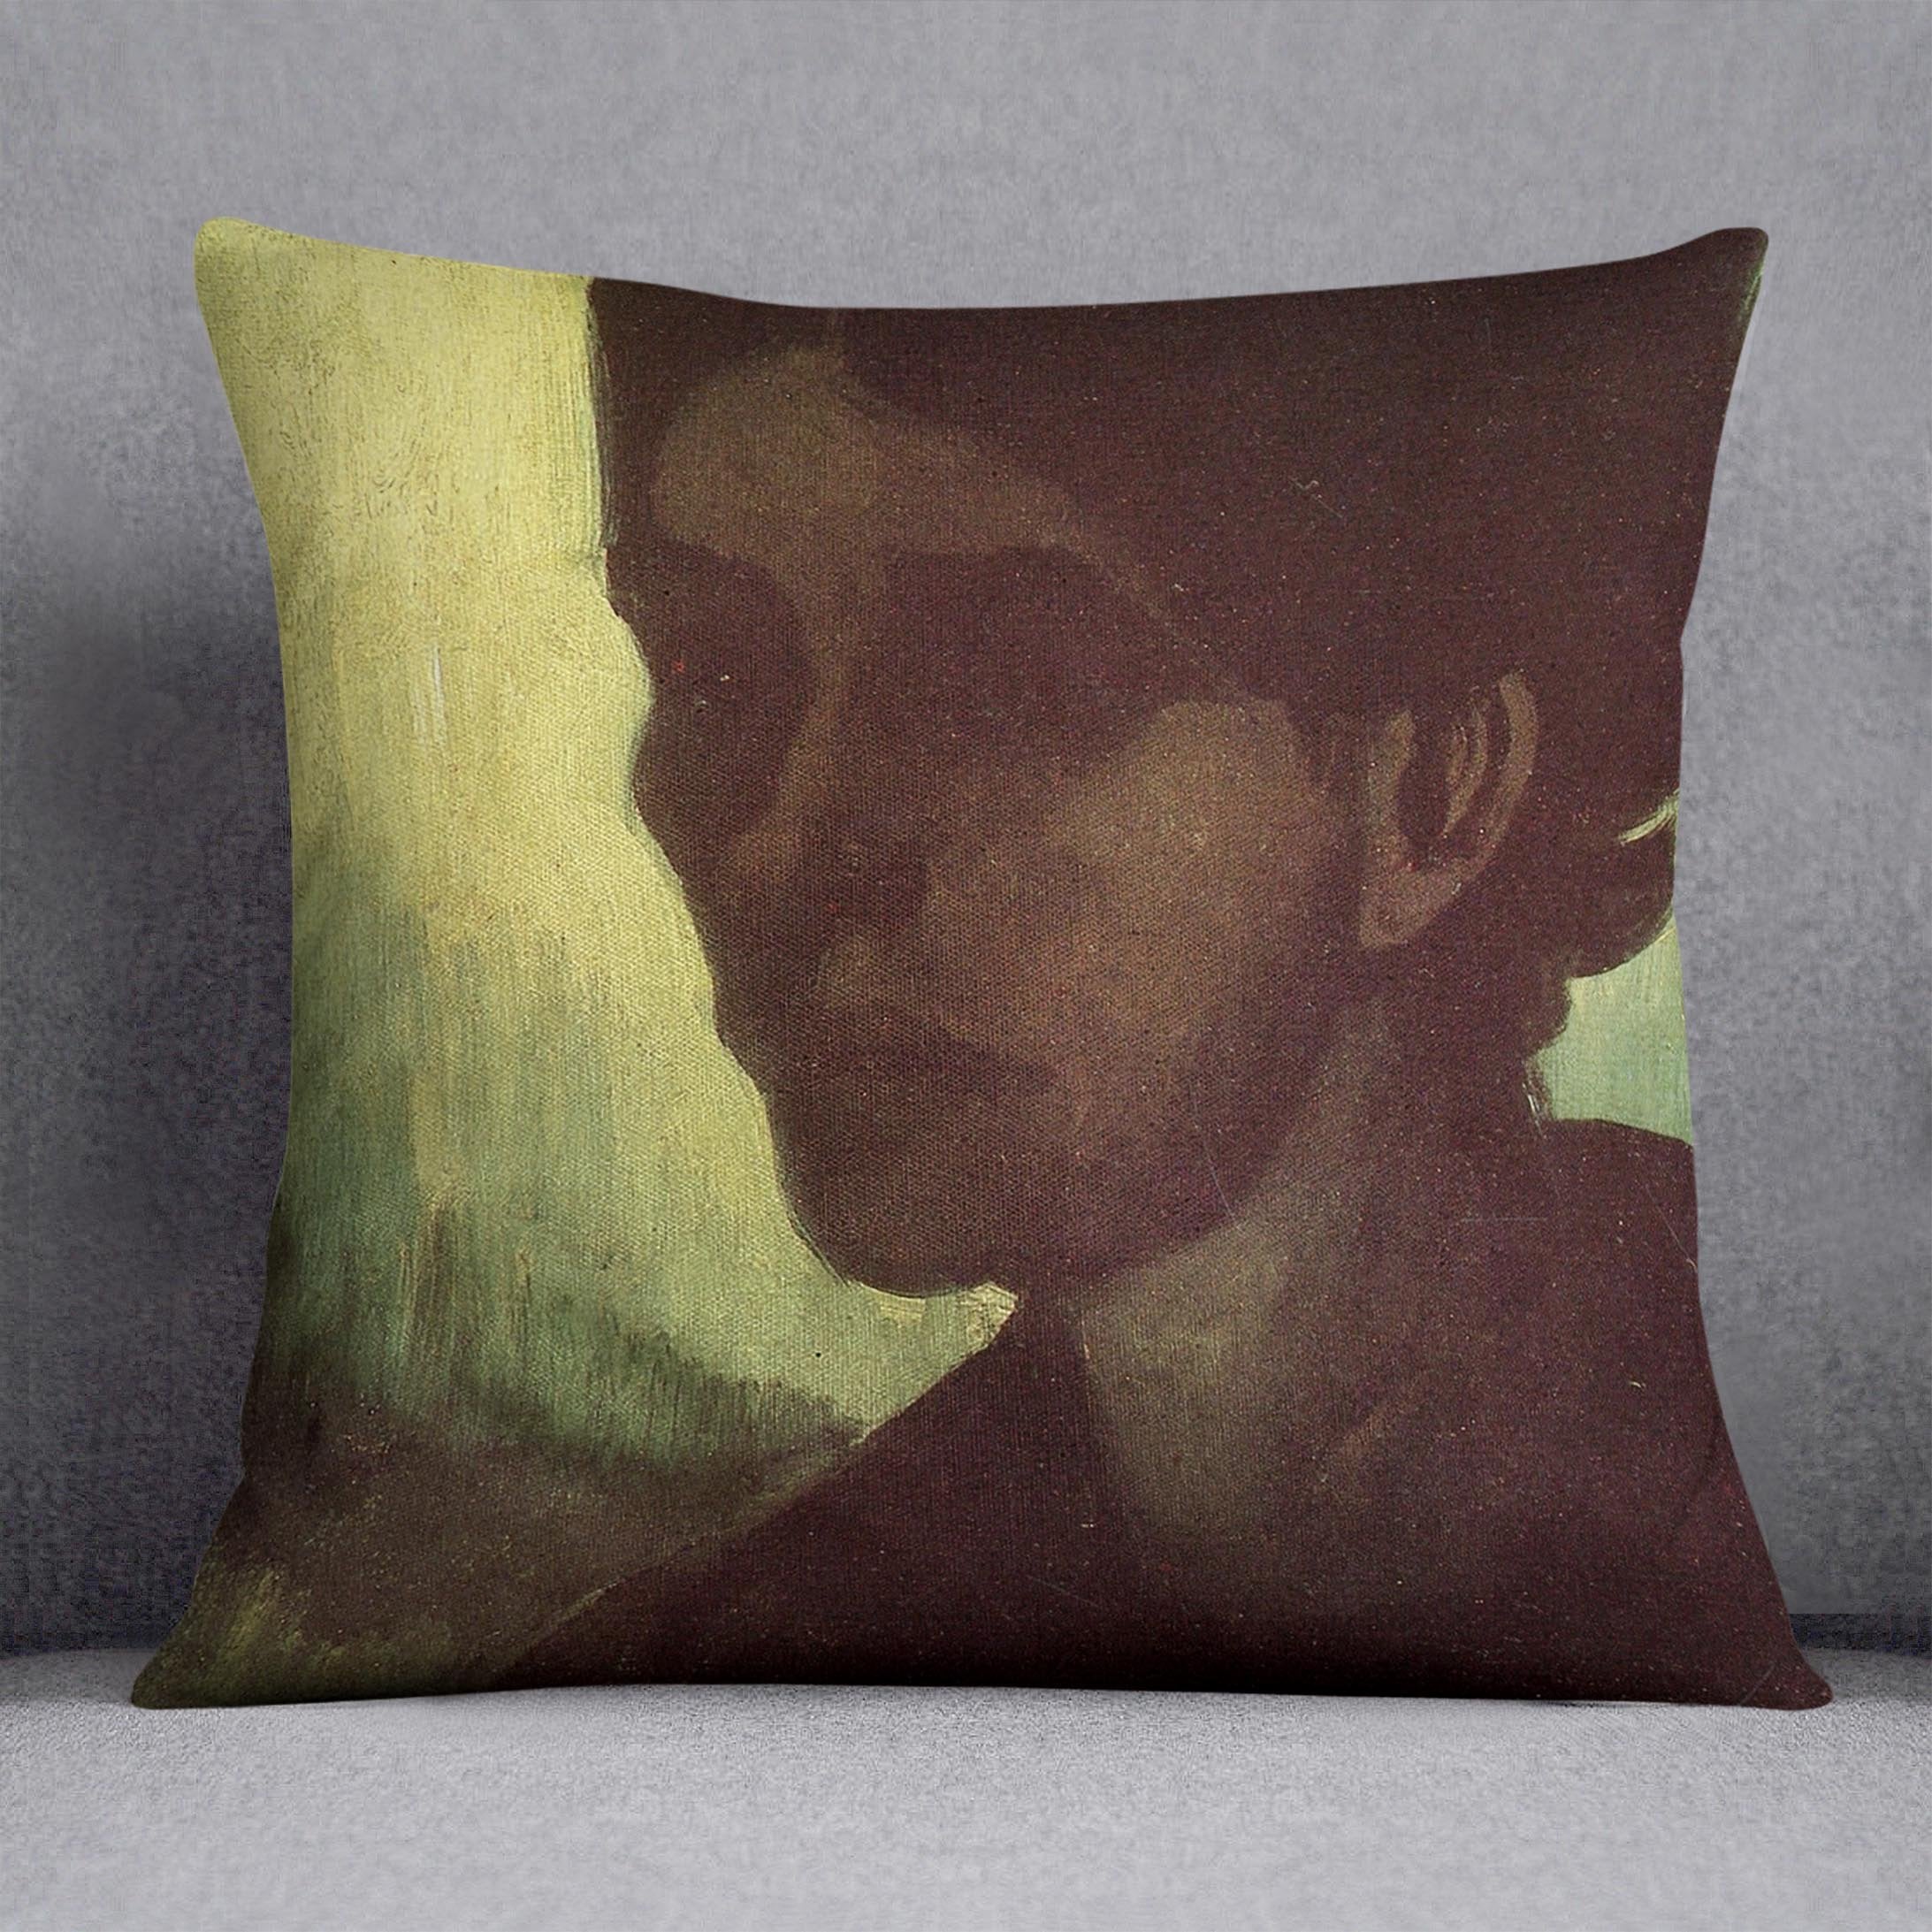 Head of a Young Peasant Woman with Dark Cap by Van Gogh Throw Pillow